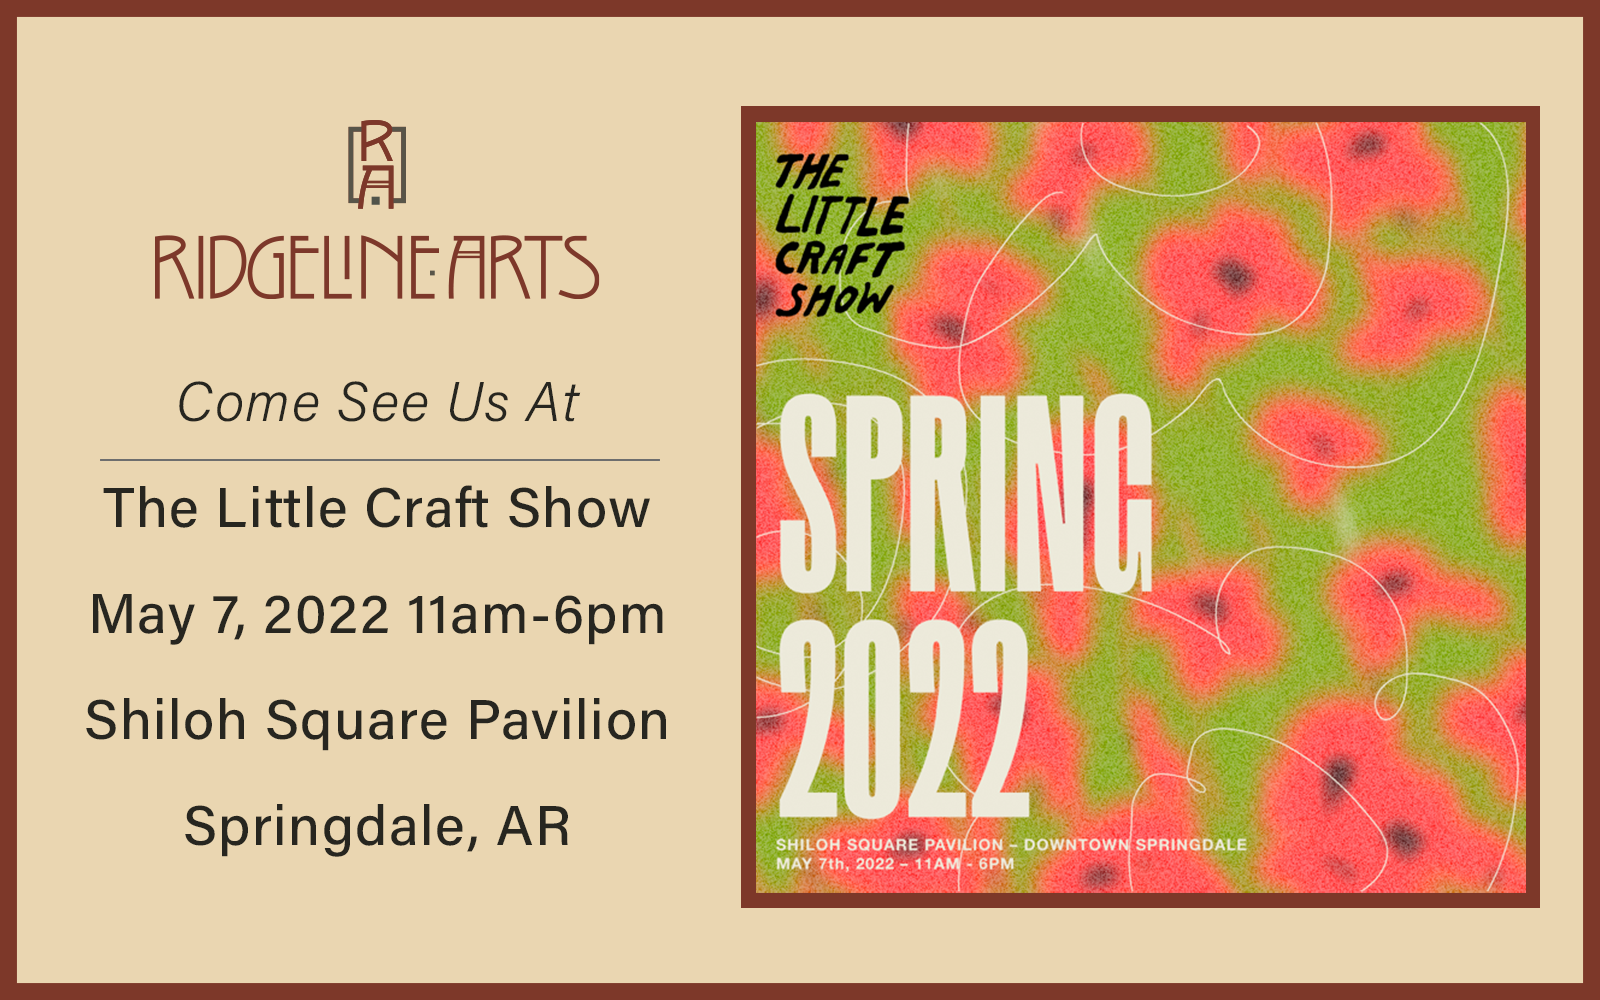 Next Up: The Spring Little Craft Show 2022